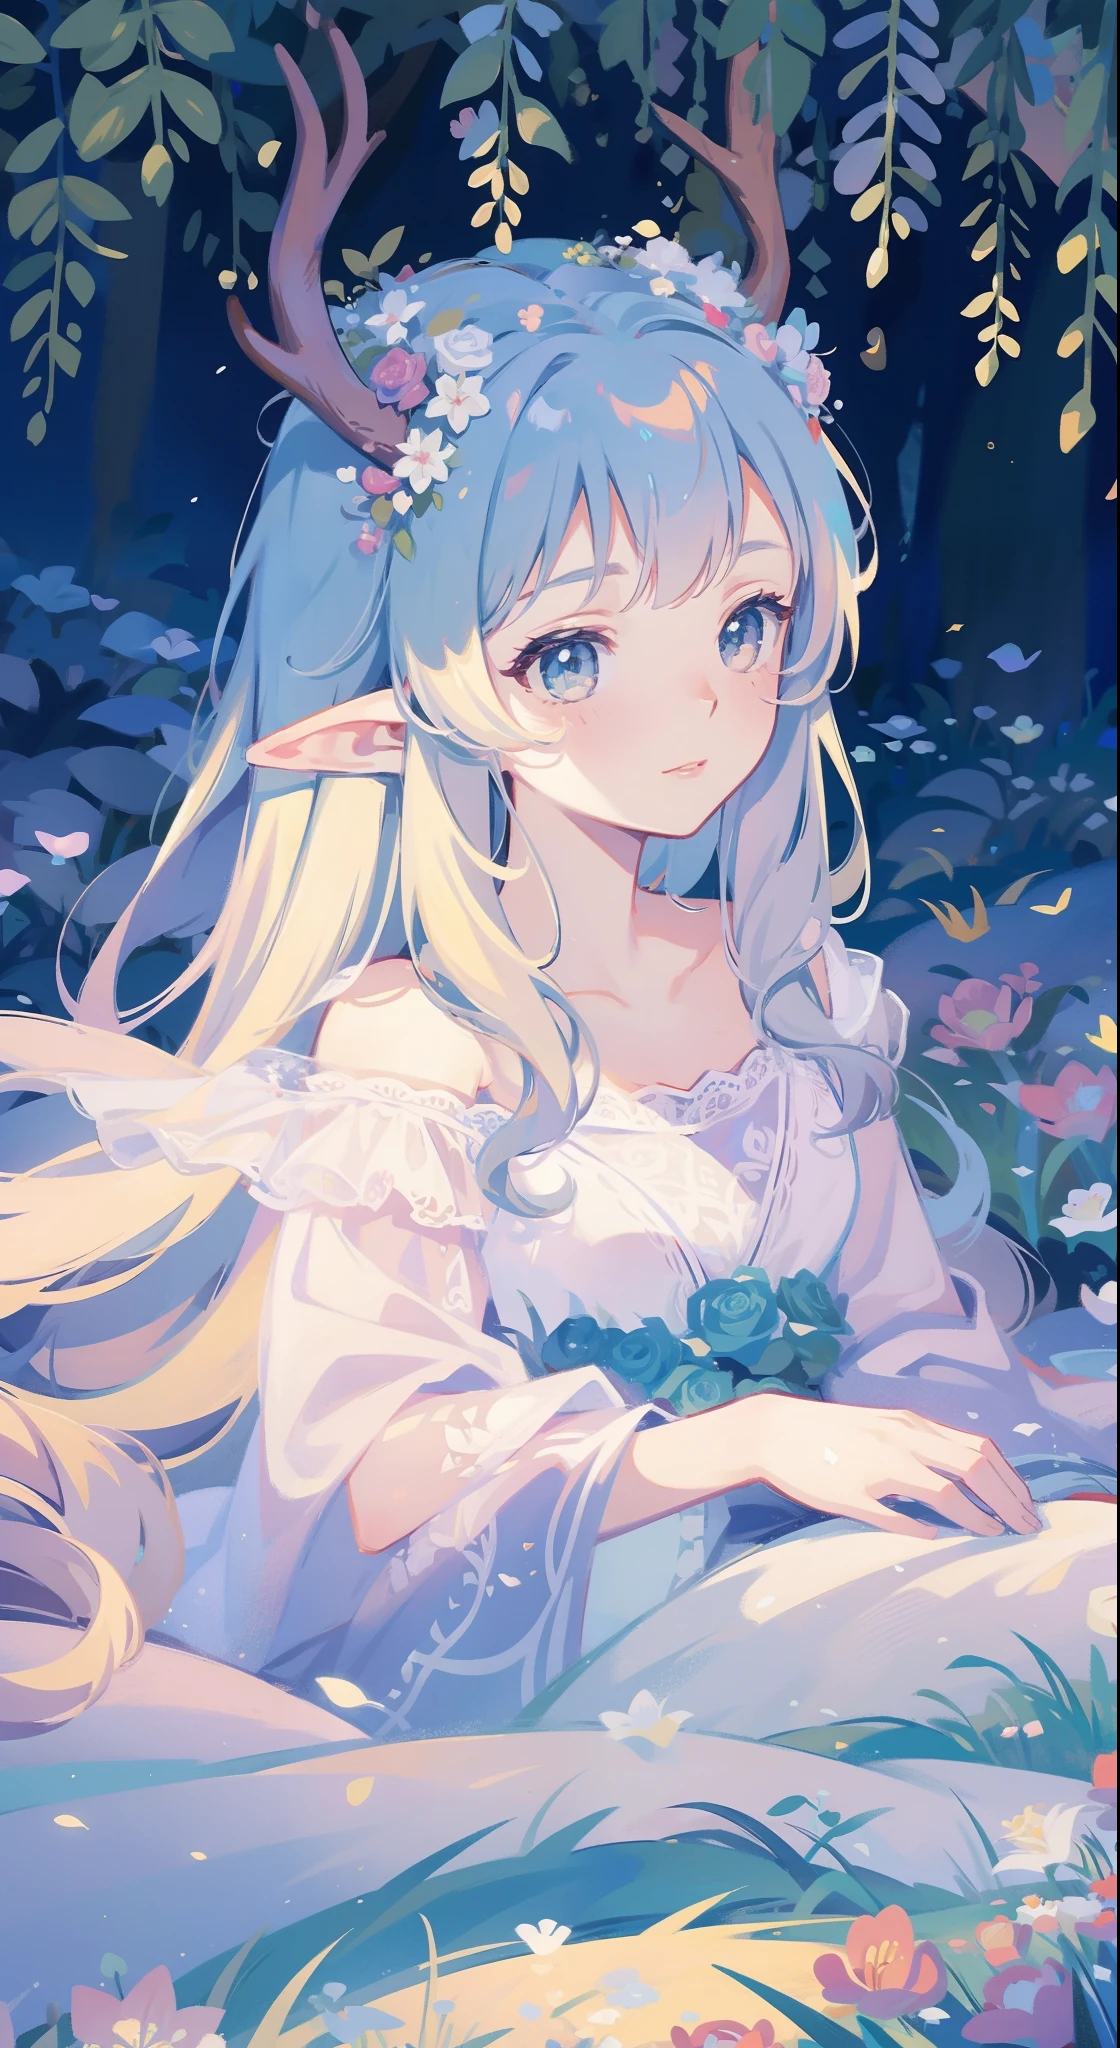 high high quality，masterpiece，Delicate facial features，Delicate hair，Delicate eyes，Delicate hair，animemanga girl，deer antlers，Black color hair，florals, Dreamy style, Fantastic flower garden，fantasy style clothing,Romantic dress,  beautiful and elegant elf queen, a beautiful fantasy empress, Fantasy art style, ((a beautiful fantasy empress)), Anime fantasy illustration, high priestess, fey queen of the summer forest, anime art nouveau, goddess of the forest, portrait of an elf queen, A beautiful artwork illustration，8K high quality detailed art（Delicate facial portrayal）（Fine hair depiction）（highest  quality）（Master masterpieces）（High degree of completion）（a sense of atmosphere）8k wallpaper，tmasterpiece，Best quality at best，ultra - detailed